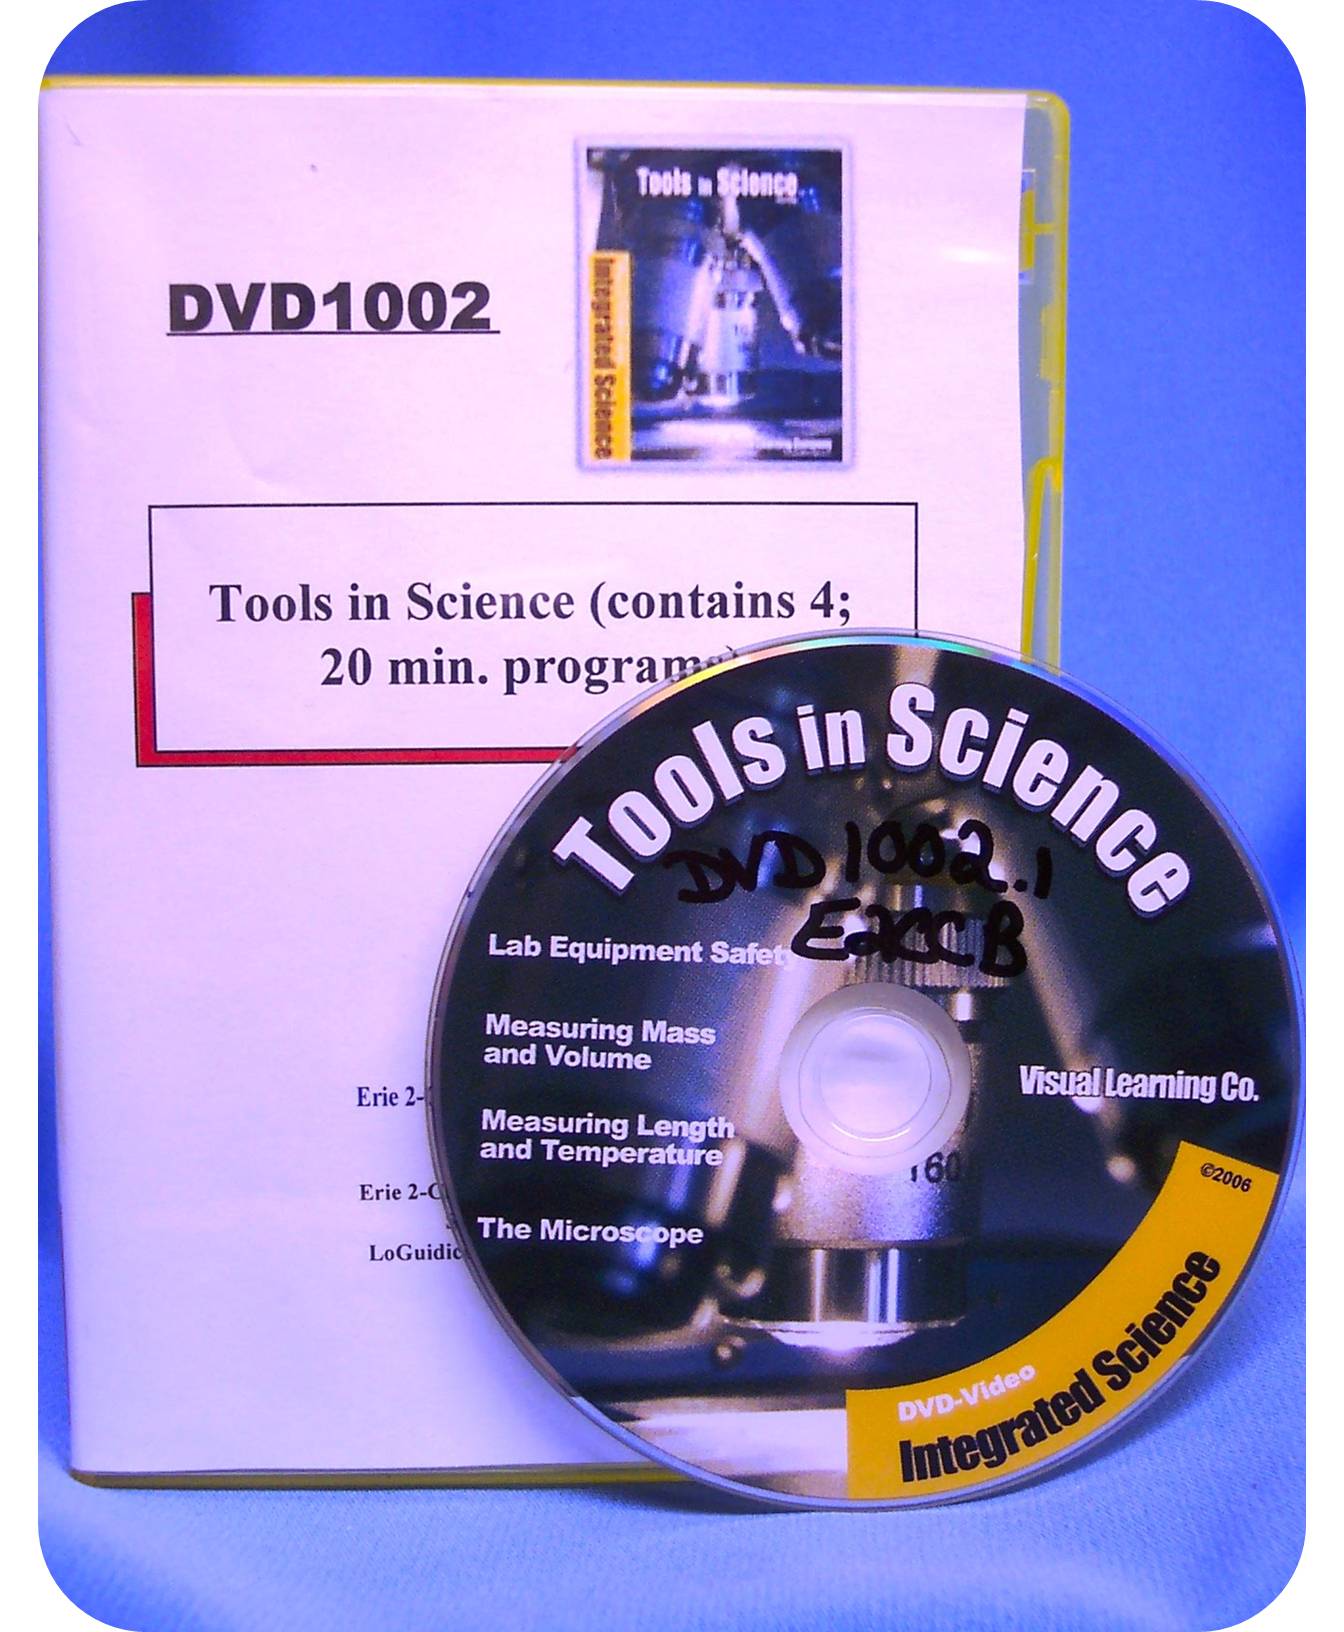 Tools in Science (contains 4; 20 min. programs)